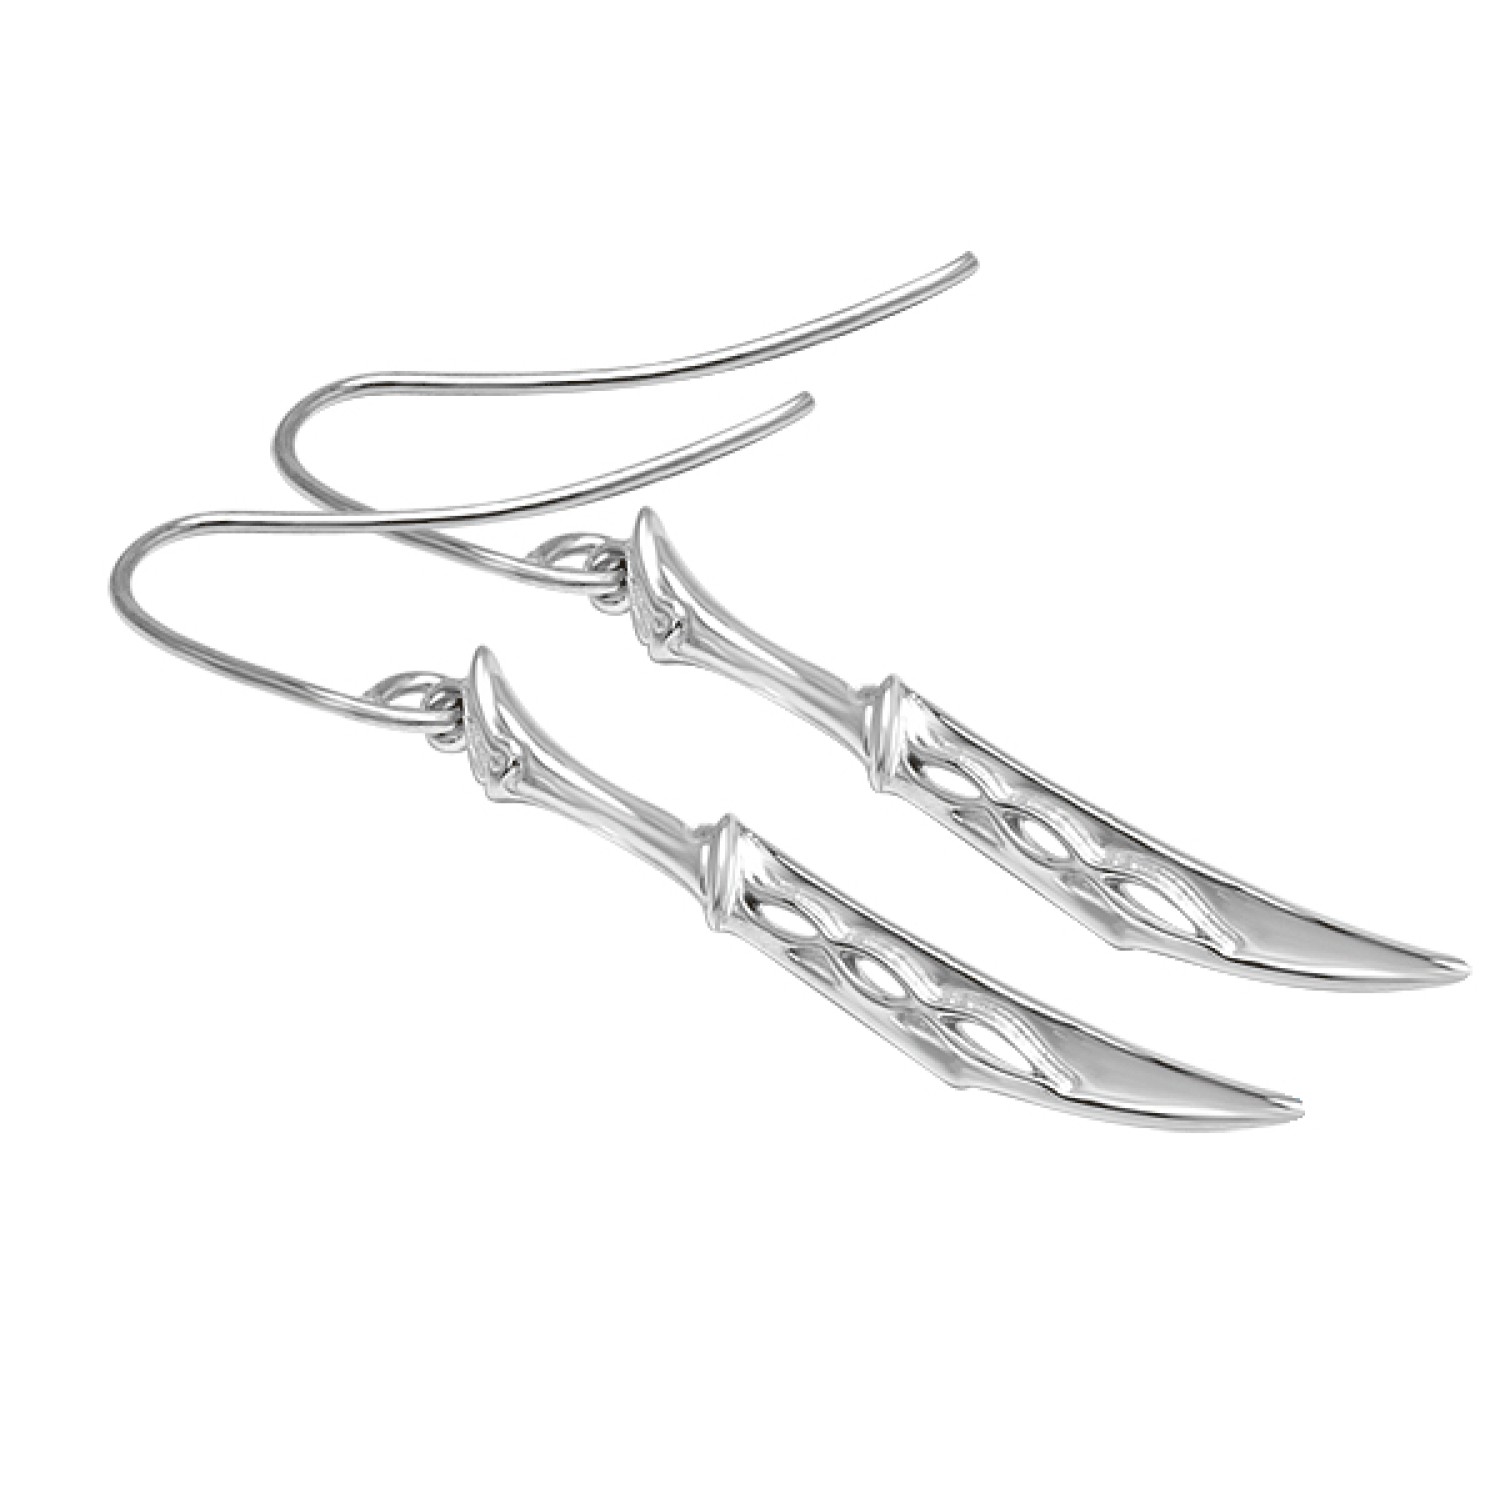 Tauriel Dagger Earrings. Tauriel first appears in the second part of the Hobbit Trilogy, The Desolation of Smaug, The  Official The Hobbit Desolation of Smaug Tauriel Dagger Earrings  handcrafted by Middle Earth New Zealands license @christies.online